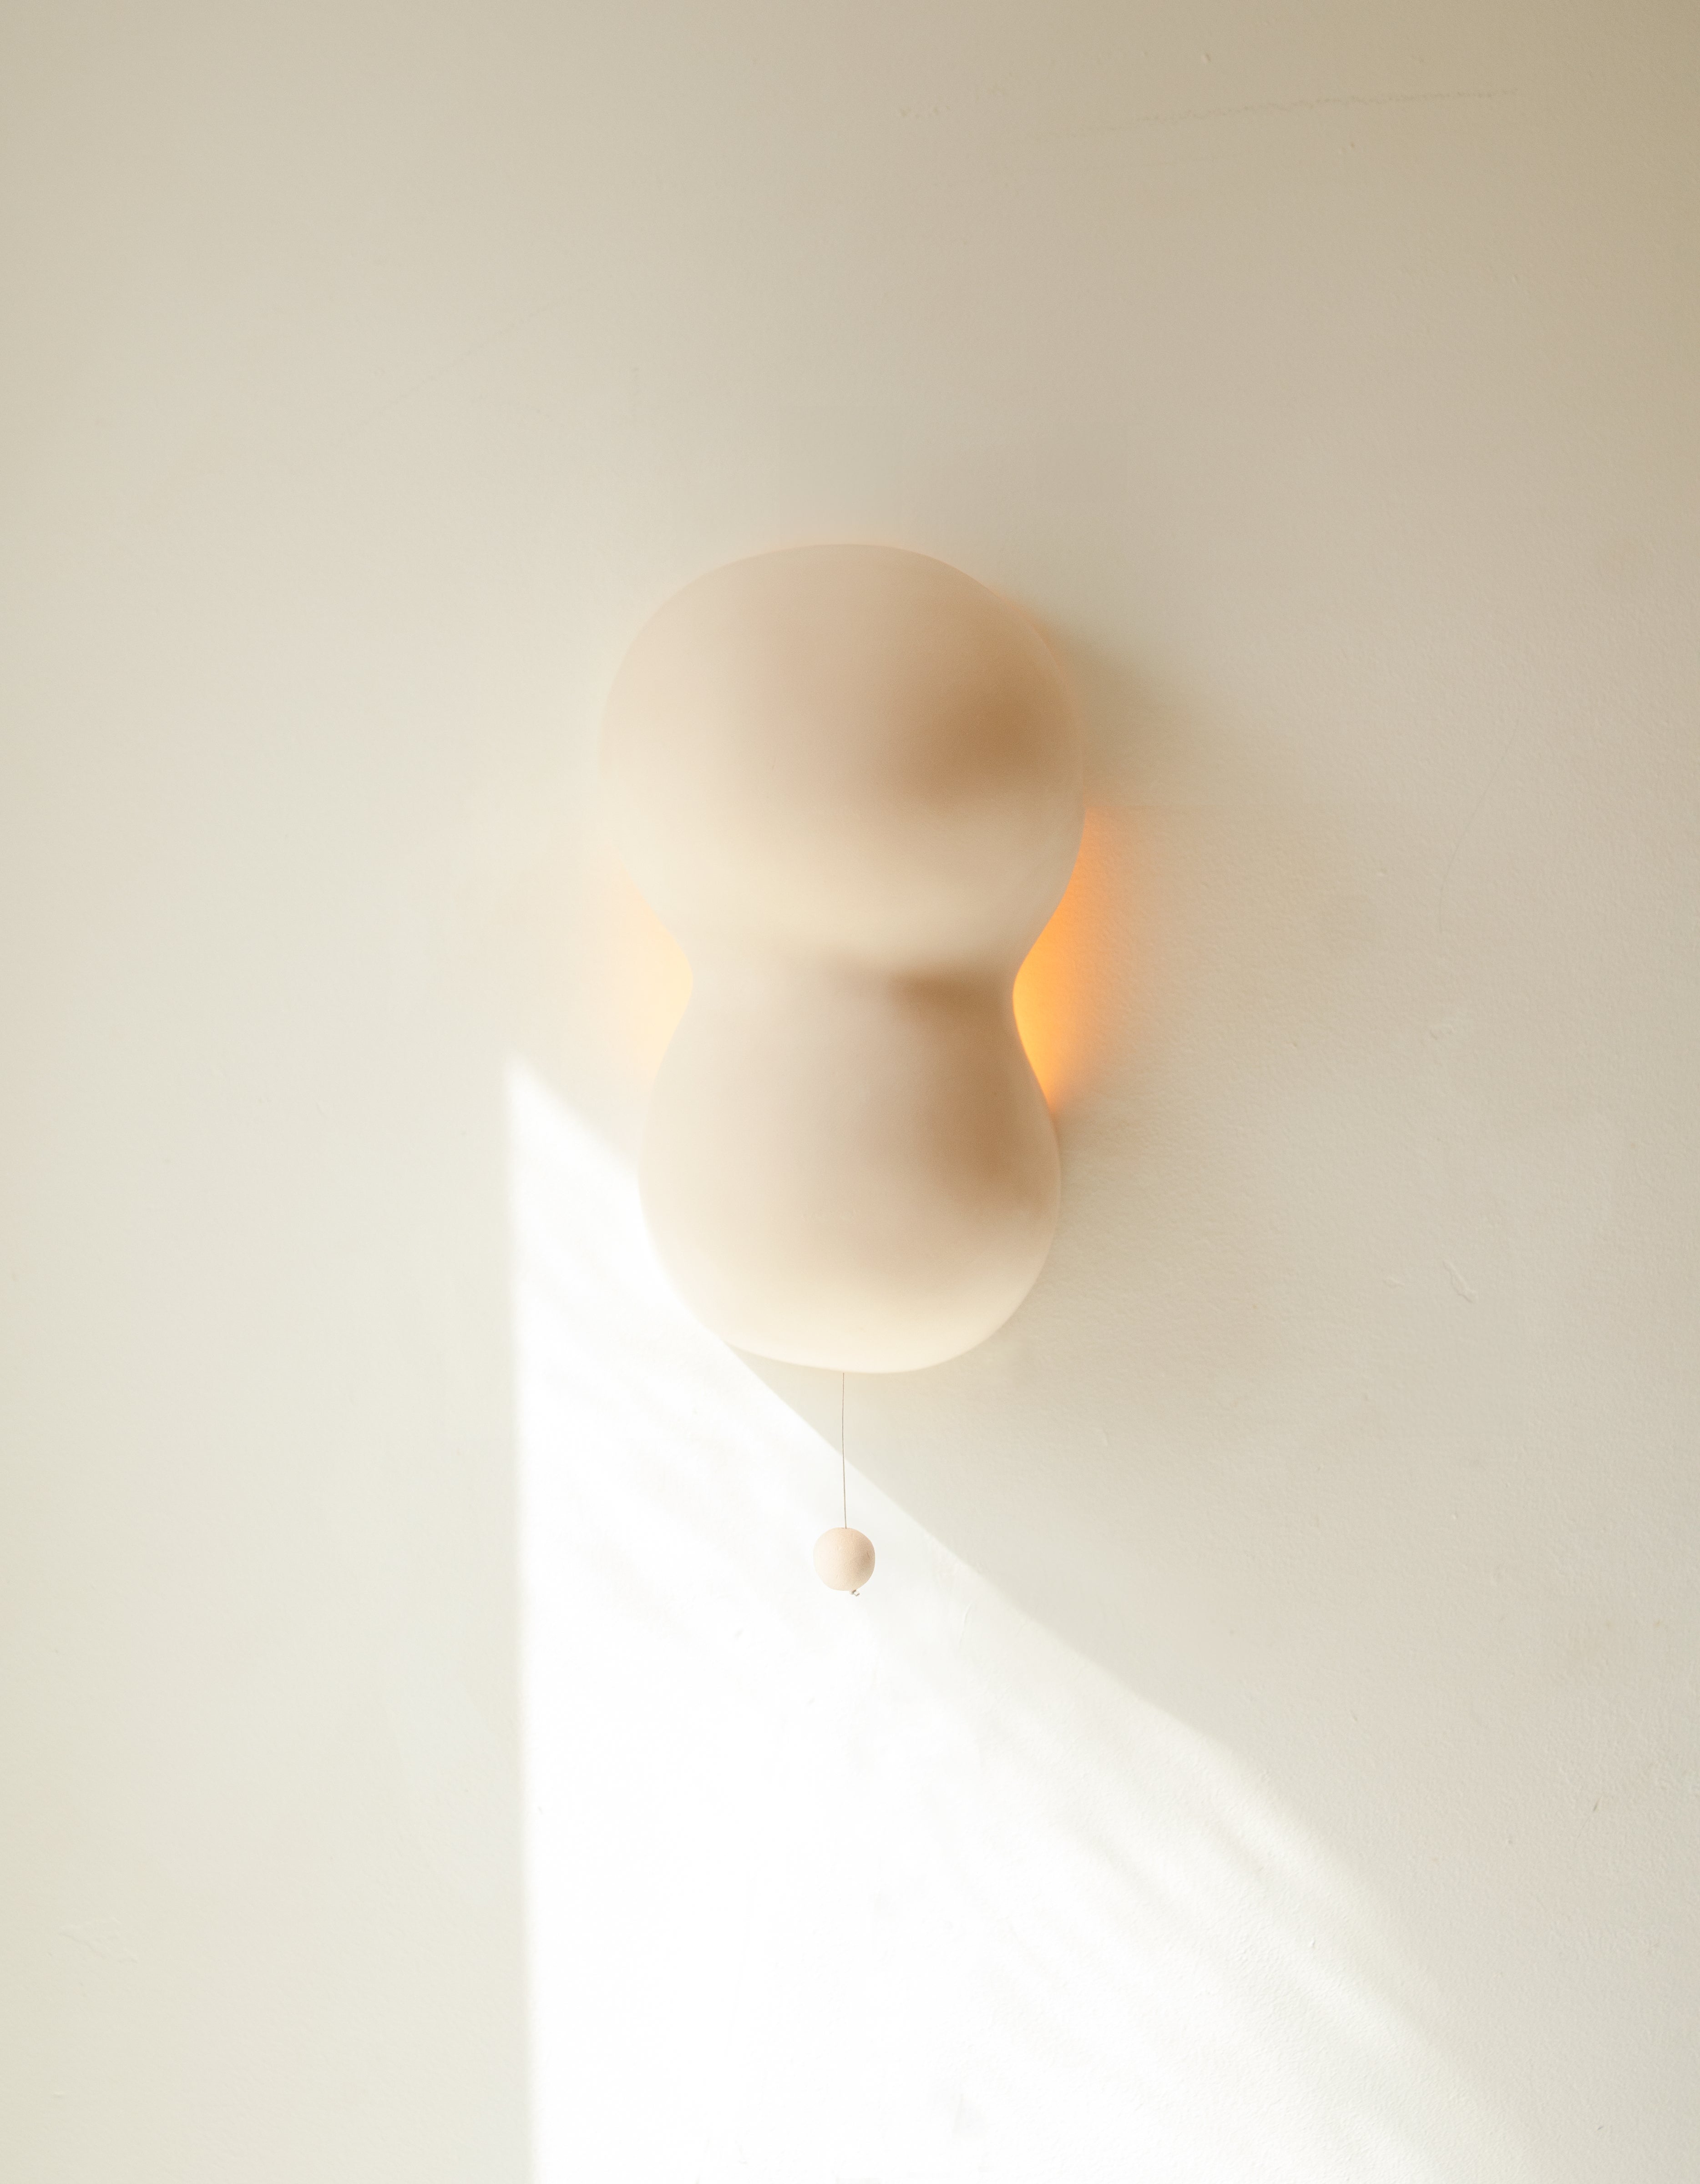 Bubble Lamp is a sculptural ceramic lamp - sconce. The Bubble Lamp stands out for its unique sculptural form and practical features. Crafted from ceramic, its organic shape and abstract contours offer an intriguing visual appeal. With its